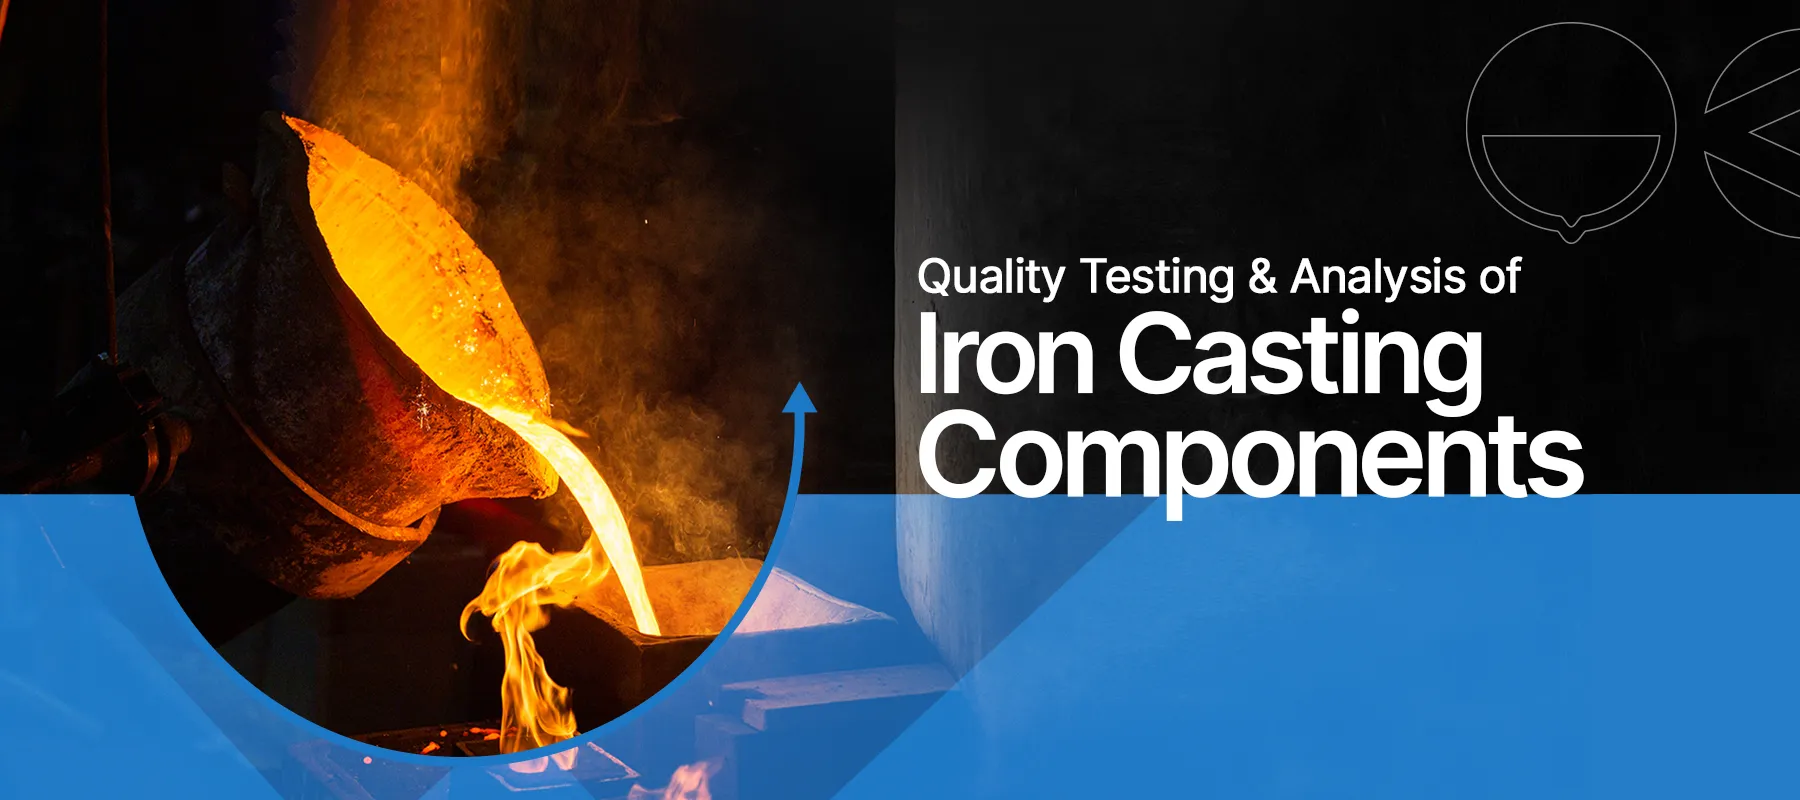 Quality Testing and Analysis of Iron Casting Components